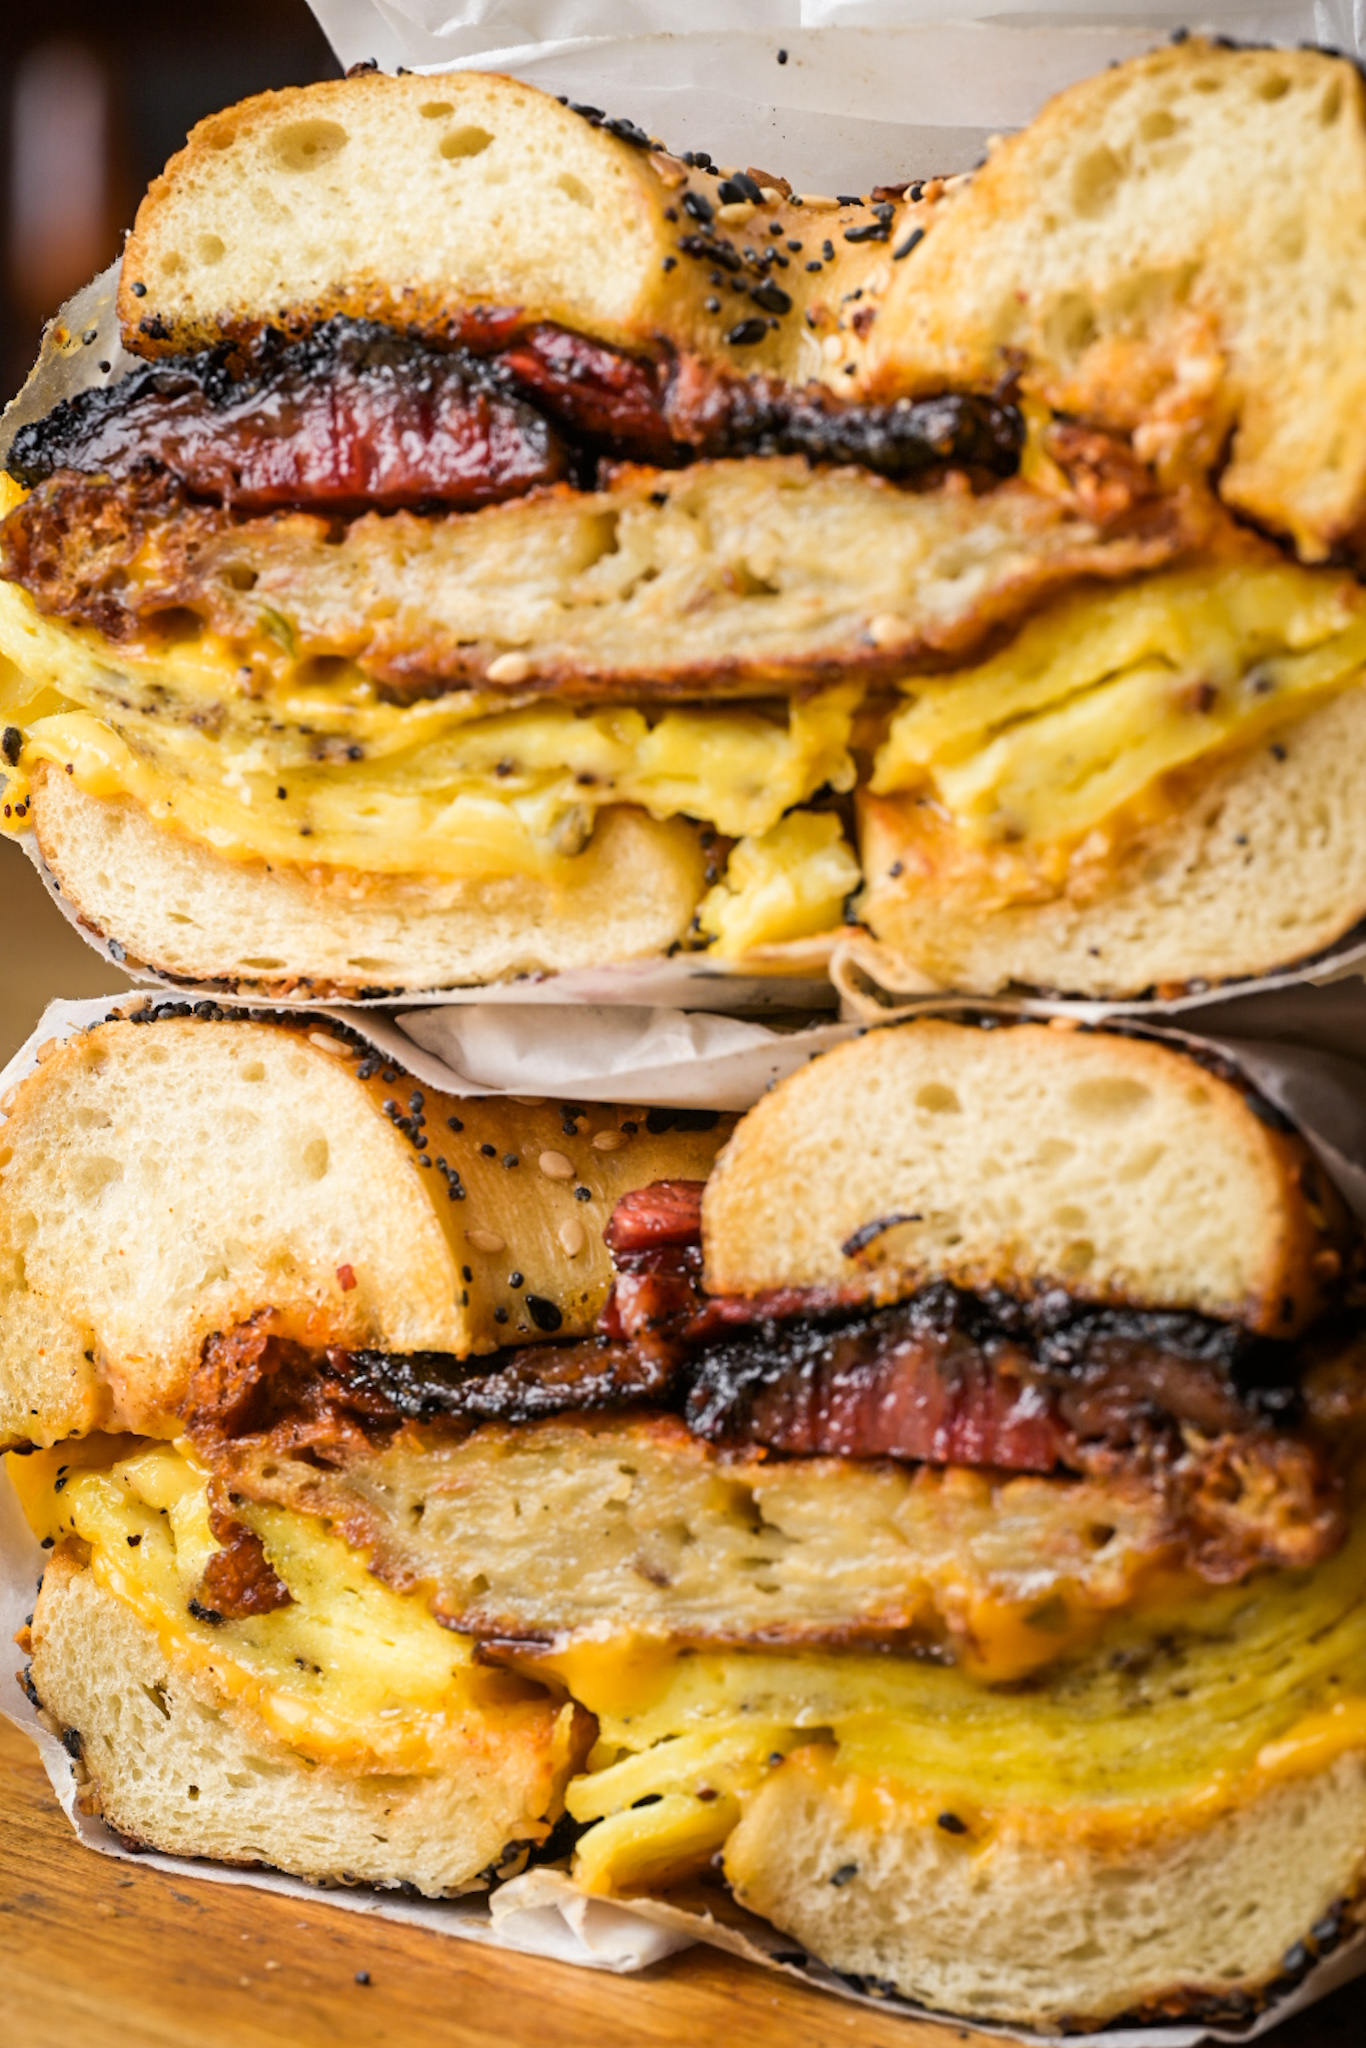 A double stack of Flour Moon's everything bagel filled with egg, latke, and smoked pastrami